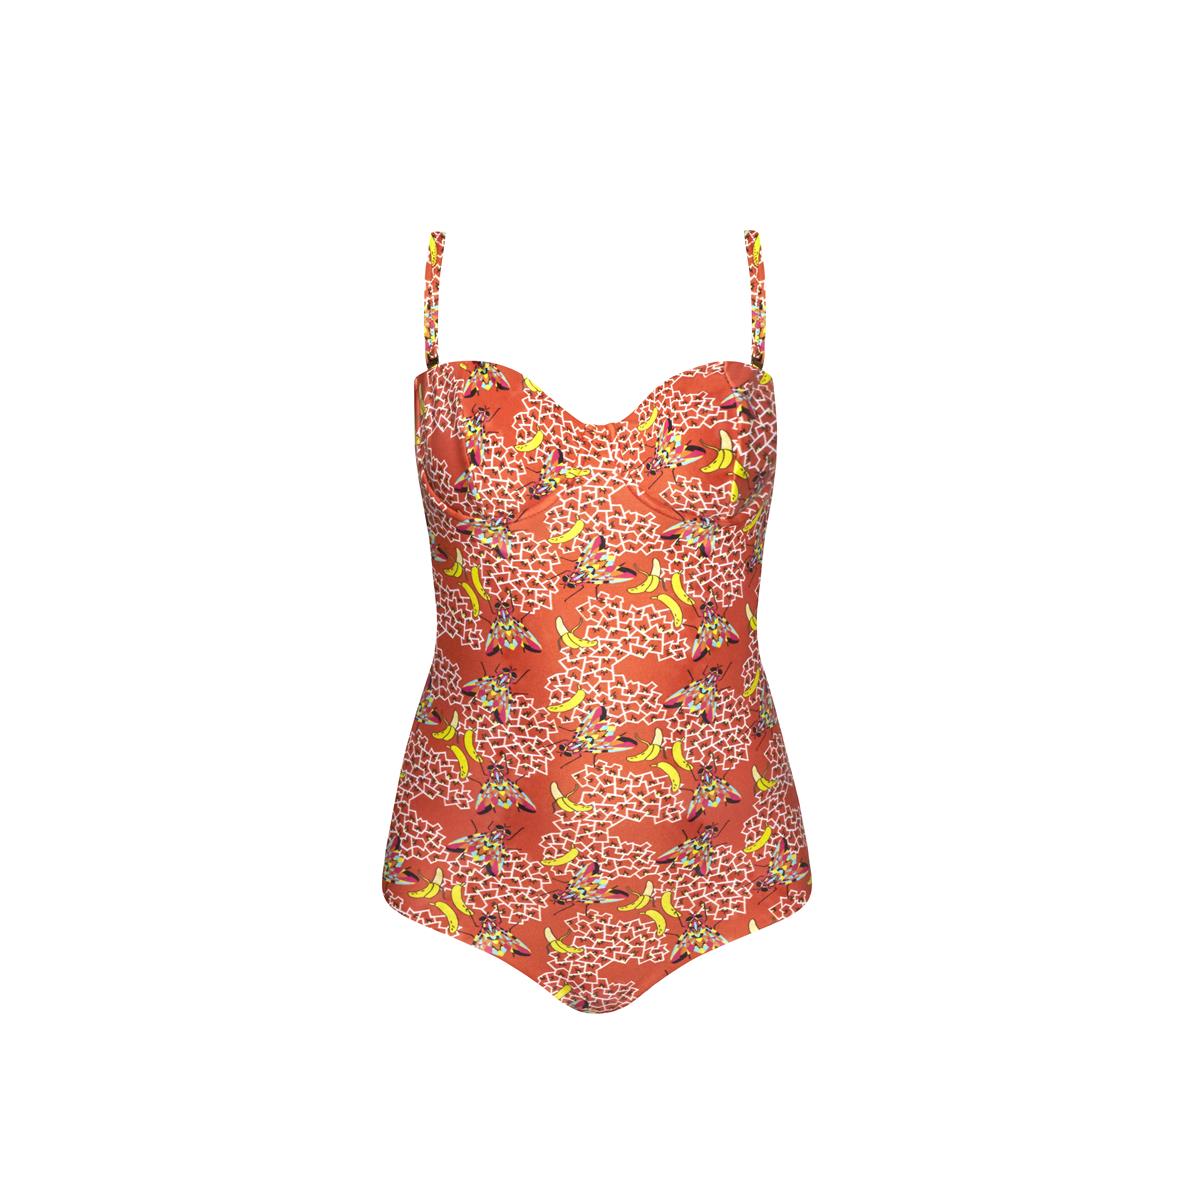 MARGARET AND HERMIONE_SS17_BANANA POP_Swimsuit3_EUR 209_banana